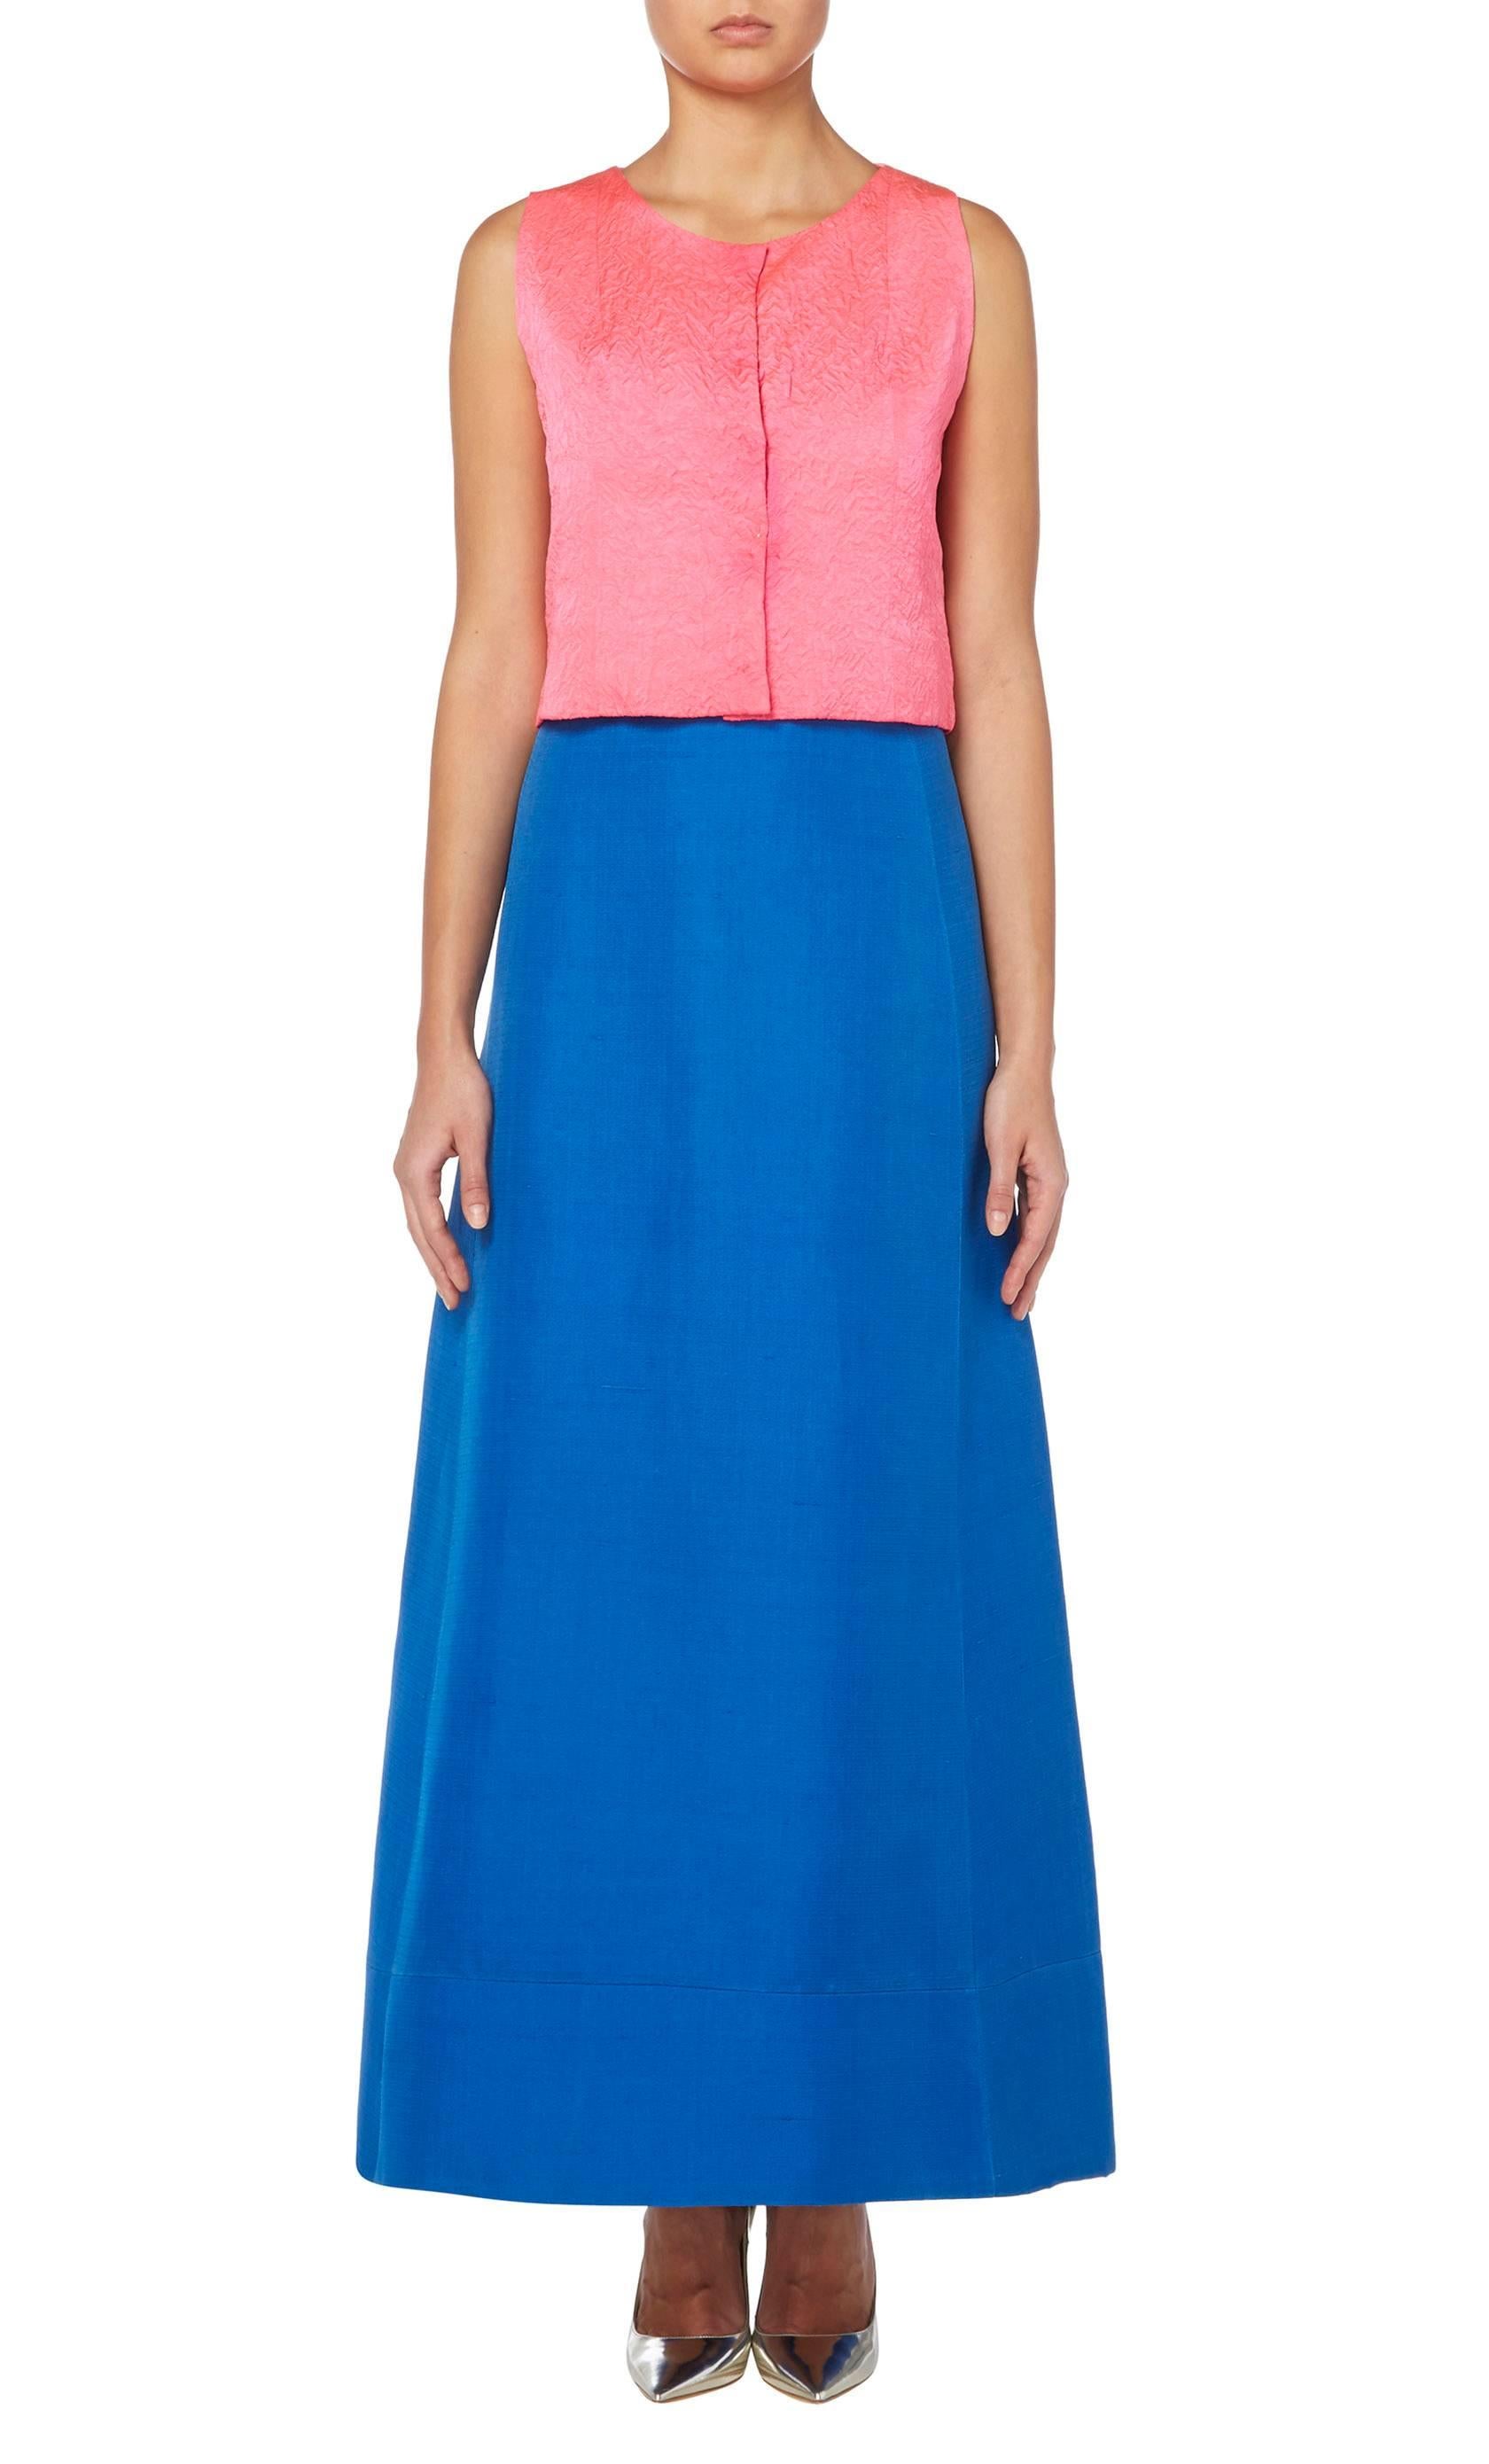 This colourful ensemble by Balenciaga for his early Eisa label is amazingly versatile. With a sleeveless top in shocking pink cloqu̩ silk and a bright blue silk gazaar maxi skirt, the piece also has the original pair of matching shoes. Wear together